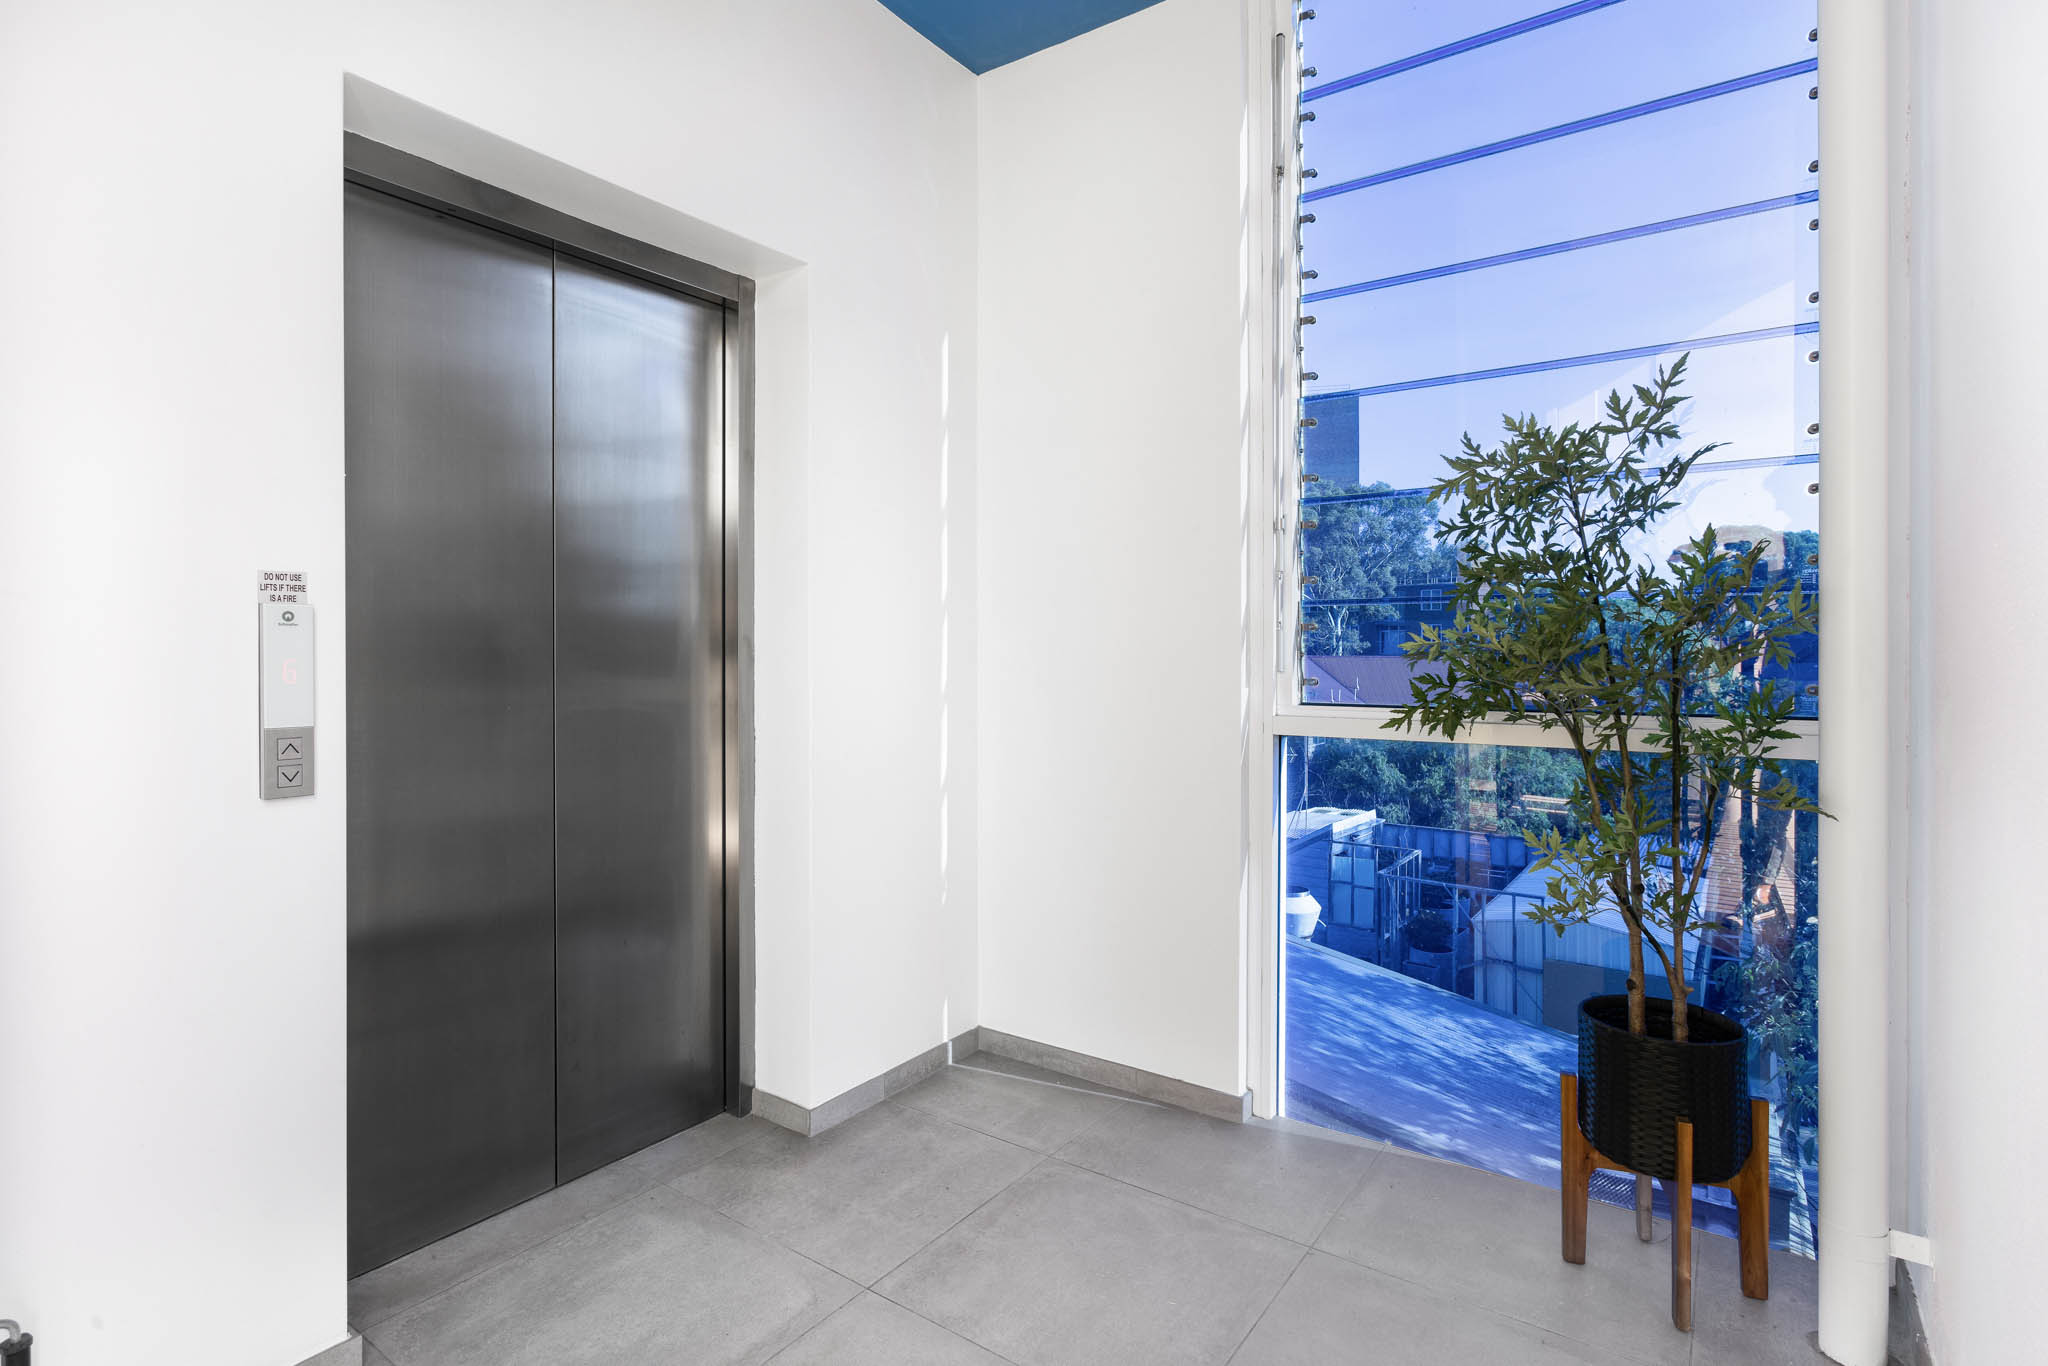 Elevator Entrance Lift Access - One Bedroom Apartment at - The Chromatic Apartments - Urban Rest - Sydney